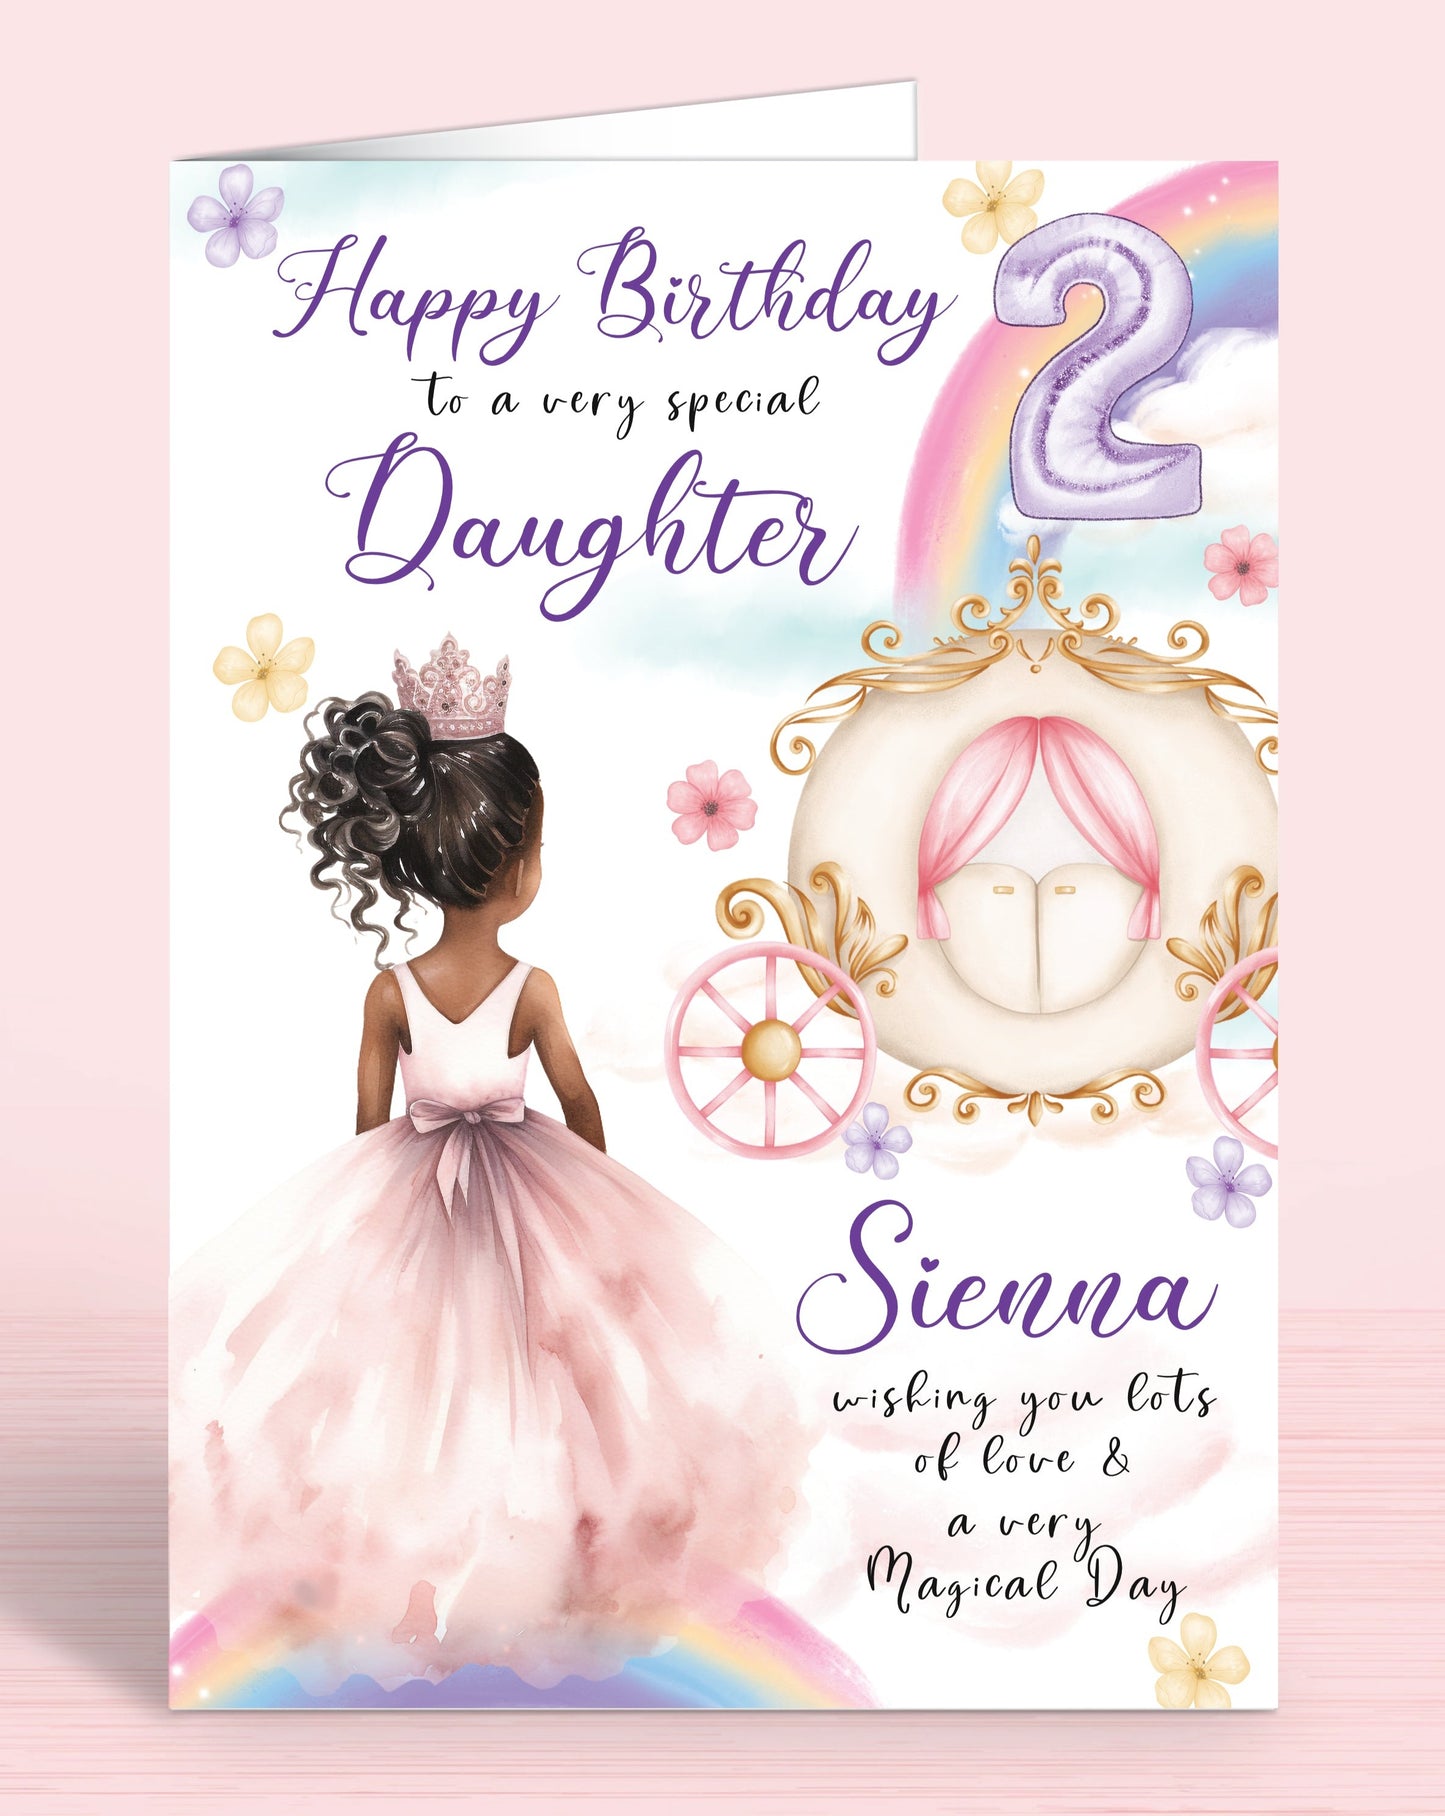 Princess Carriage Personalised Birthday Card, Granddaughter 2nd, 3rd Birthday Card, Happy Birthday to a very special Daughter, [Name] wishing you lots of love & a very Magical Day [GIRL E] BLACK HAIR | Oliver Rose Designs